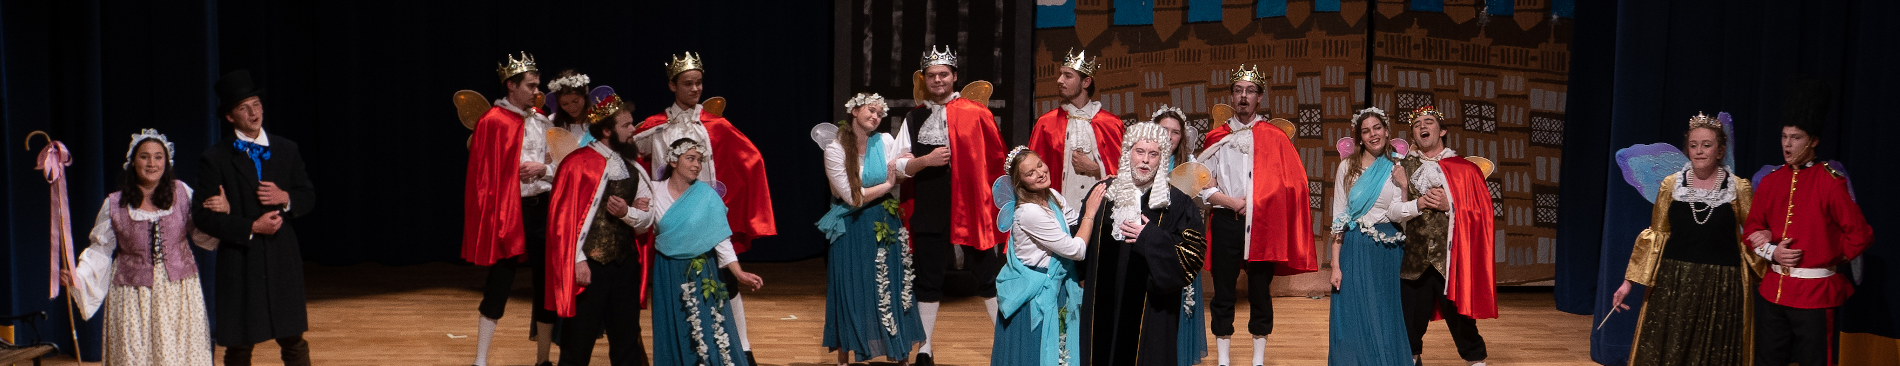 The Peers, their fairies, Will, the Queen, the Chancellor, and Strephano and Phyllis in the finale scene of the play